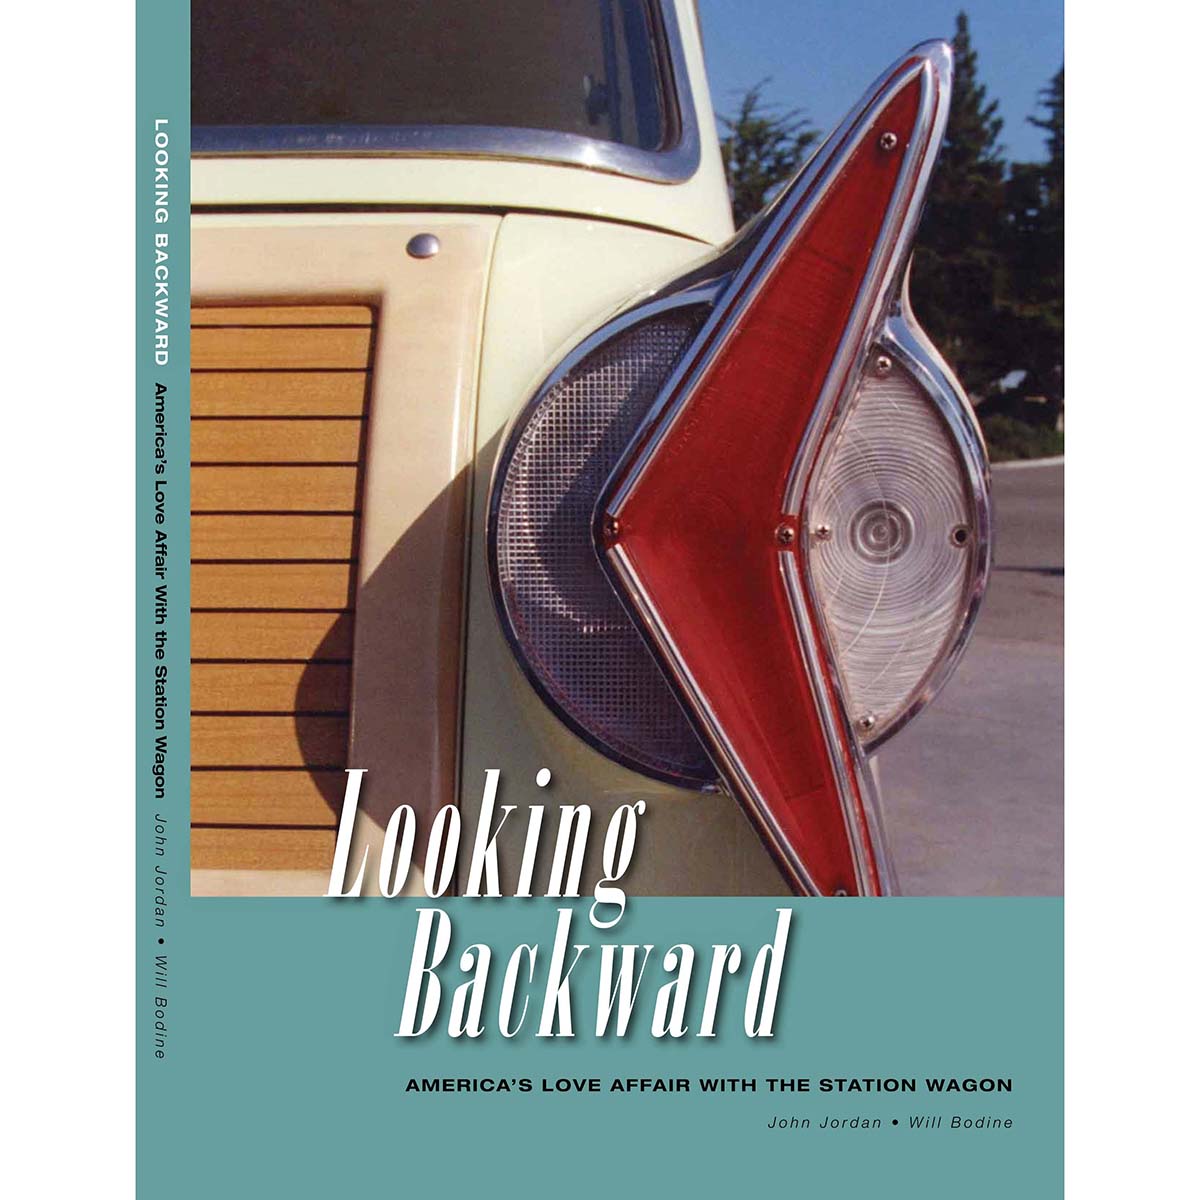 Looking Backward: America's Love Affair with the Station Wagon - Destination PSP